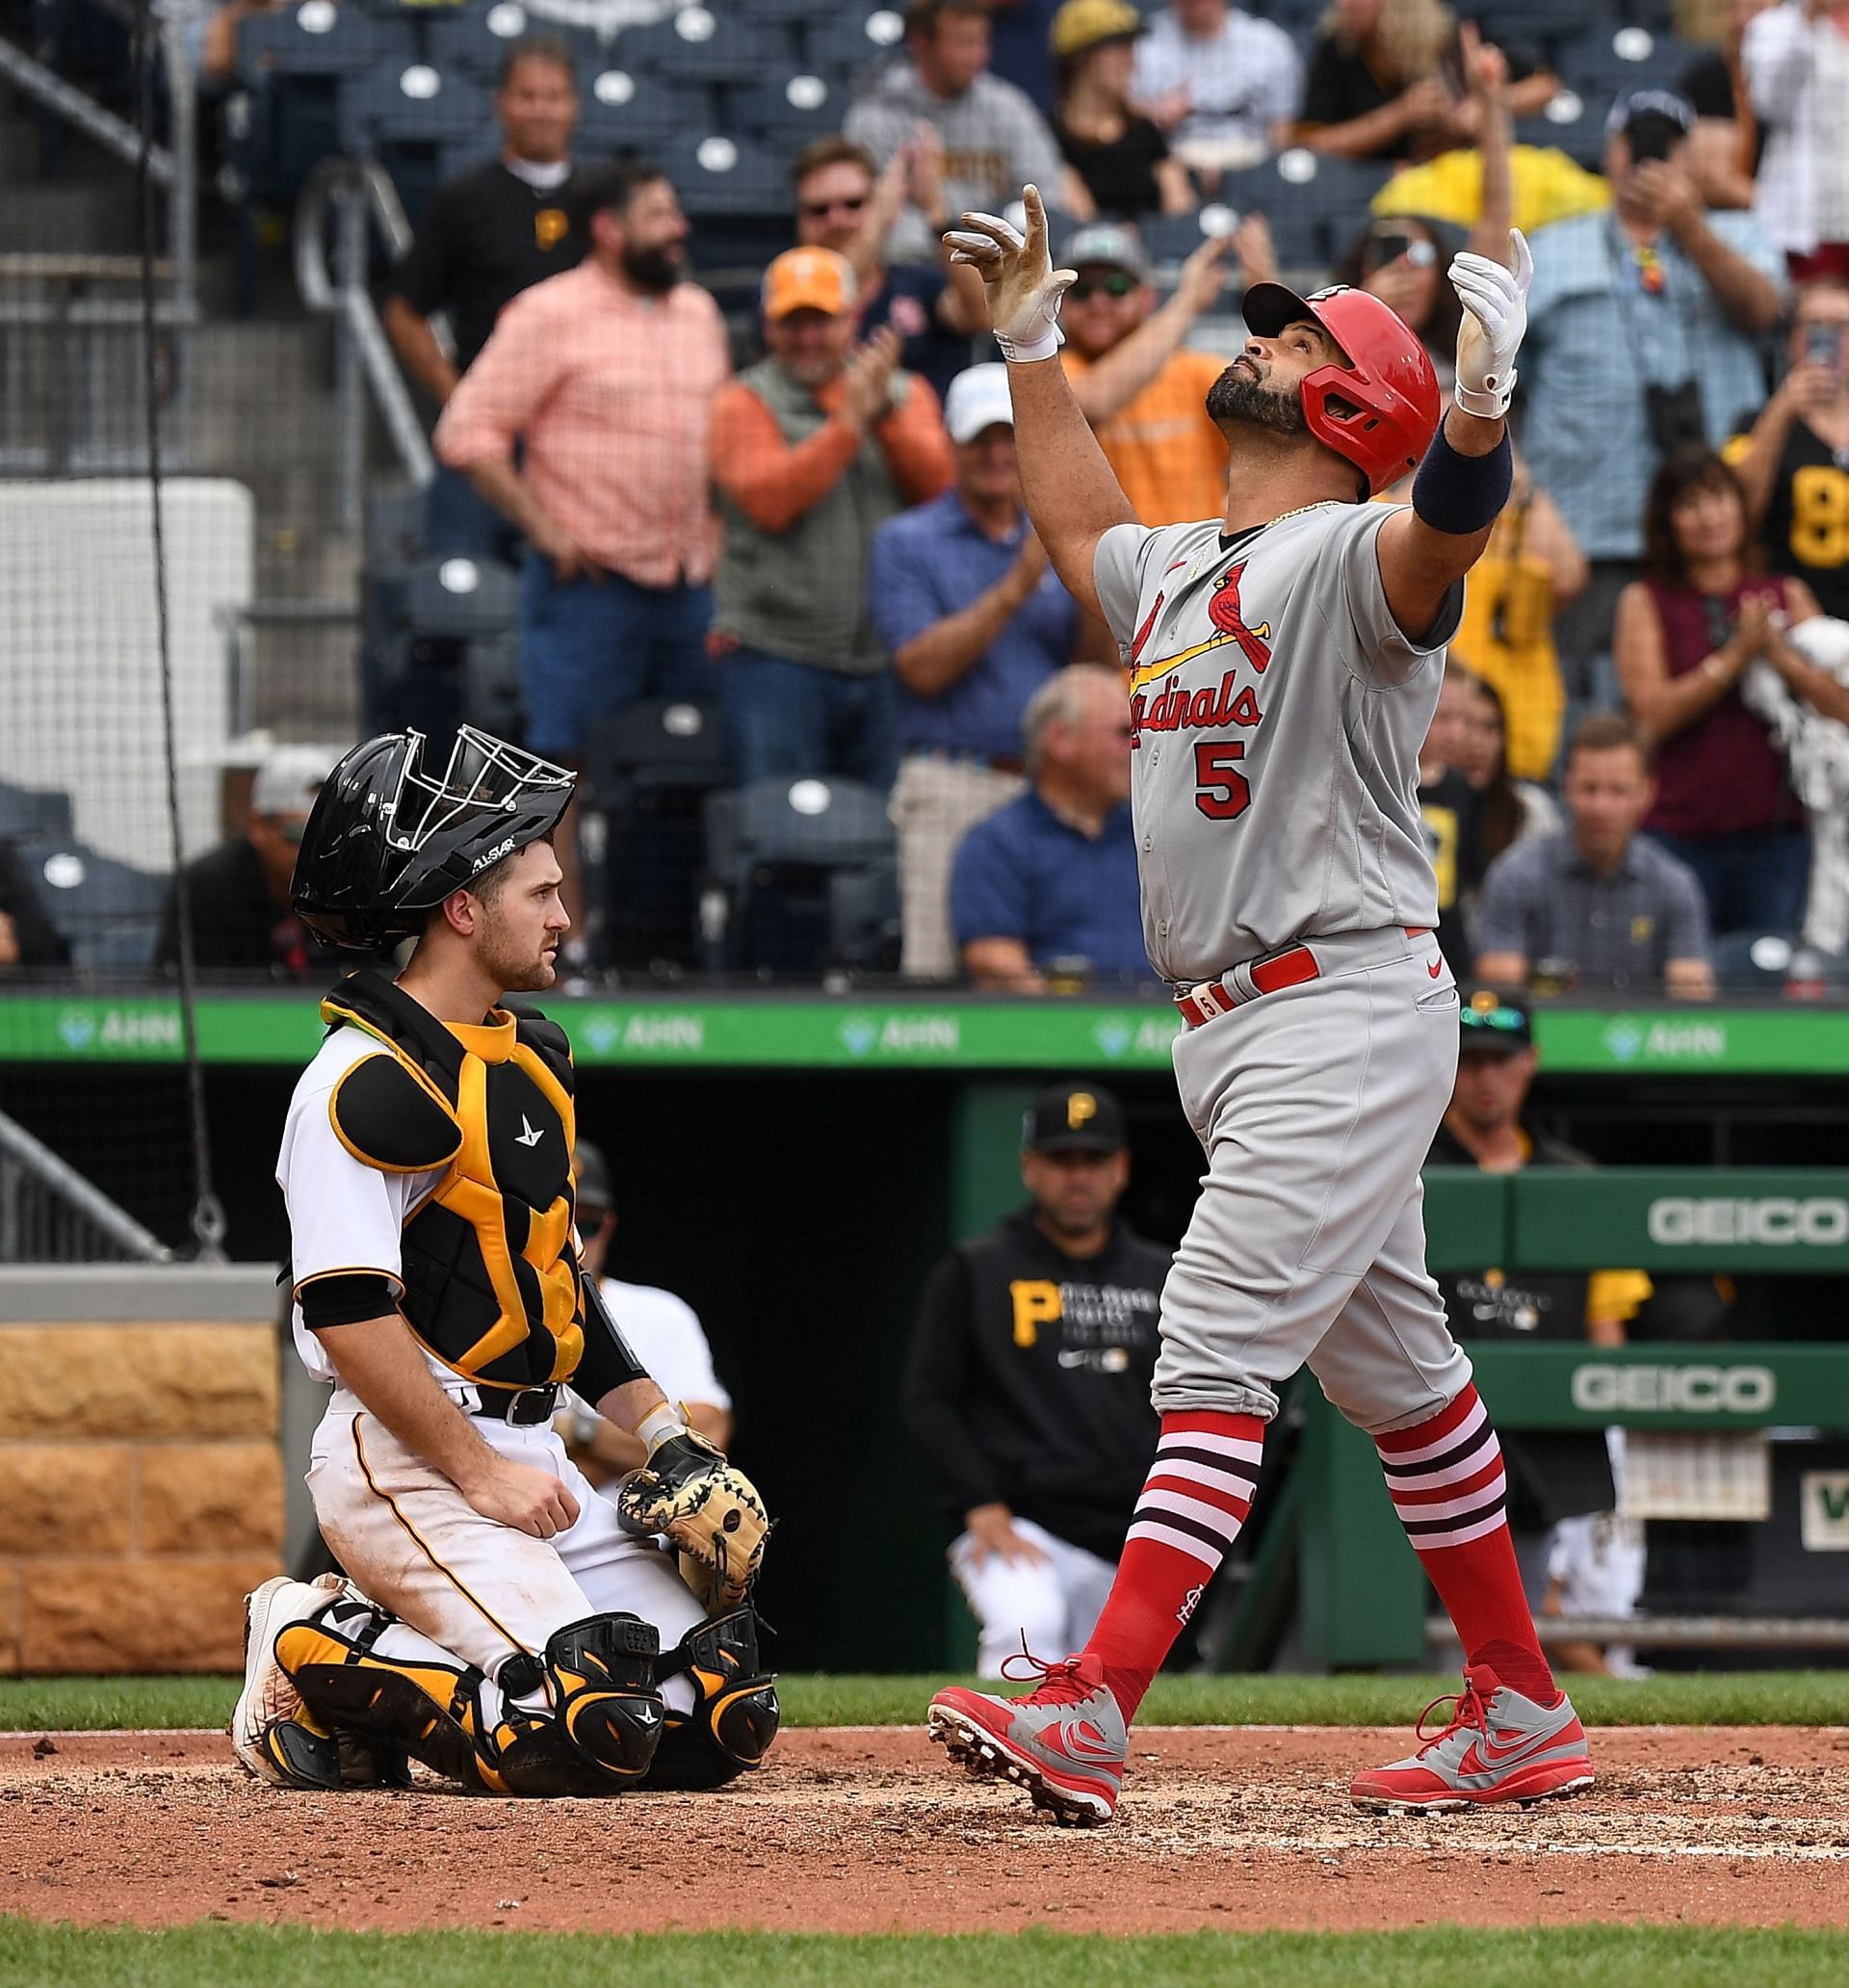 Cards' Pujols hits 700th home run, 4th player to reach mark